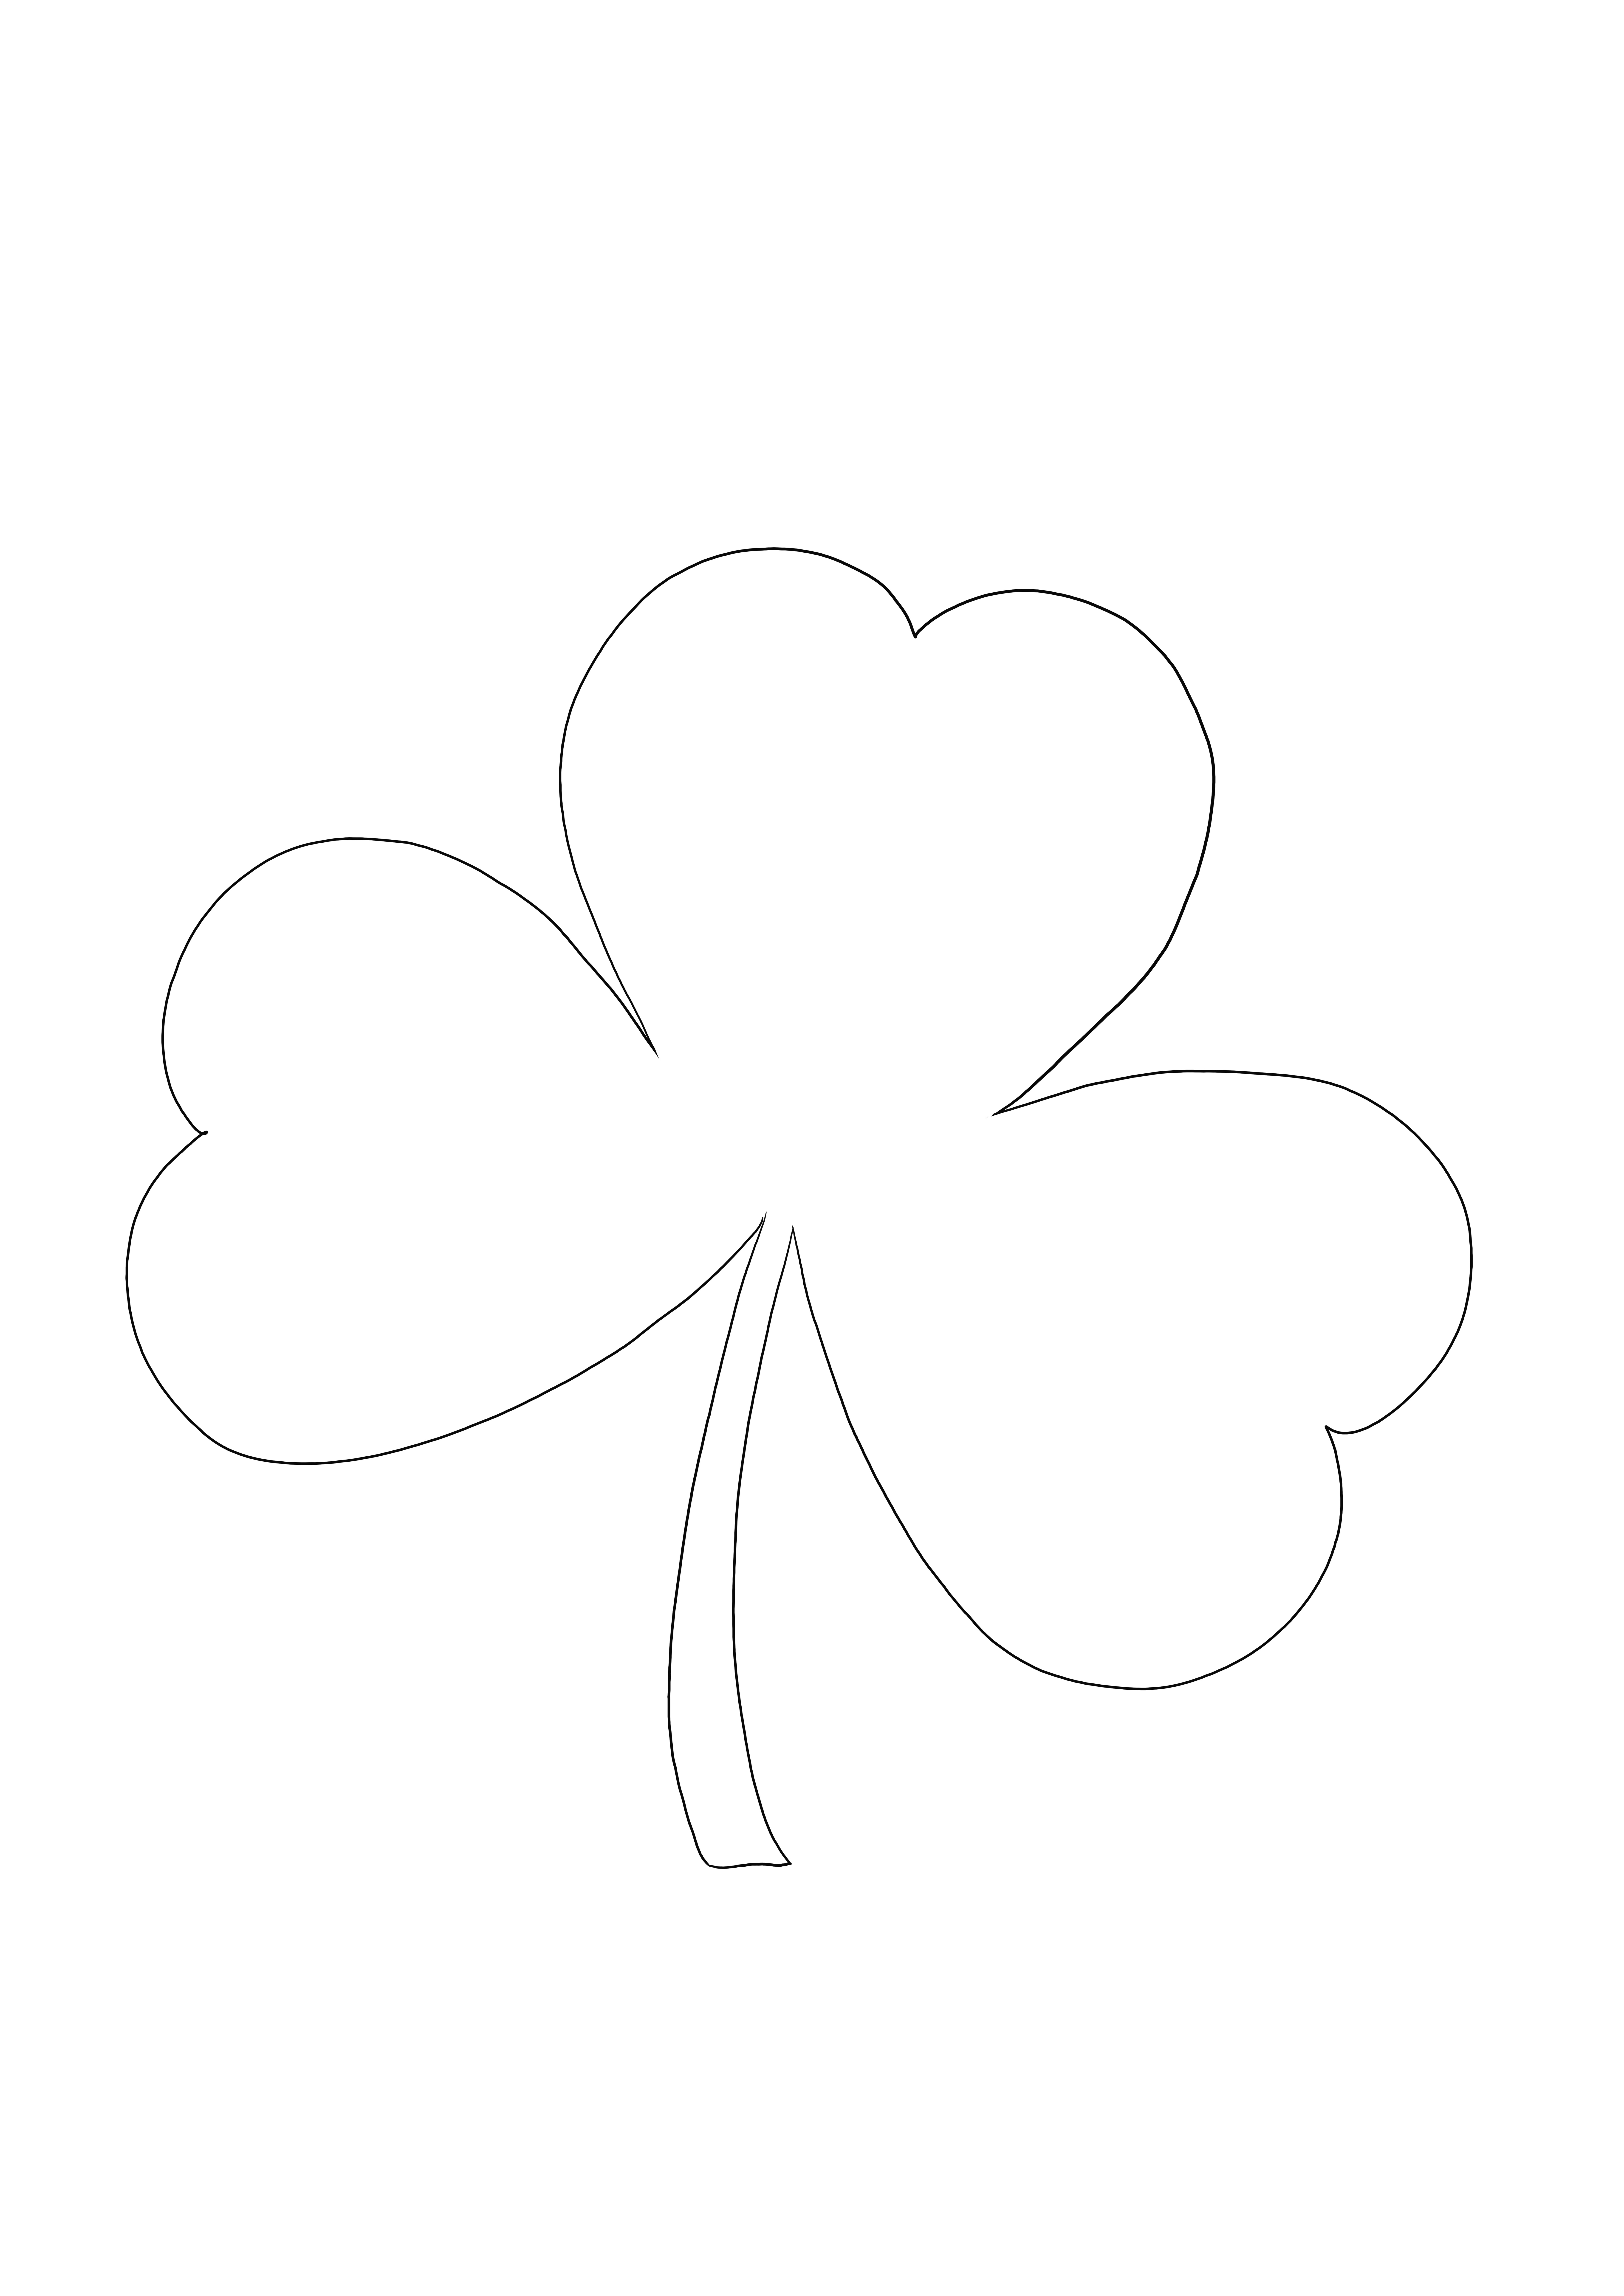 The shamrock leaf-free to color sheet is a symbol of St. Patrick's Day.